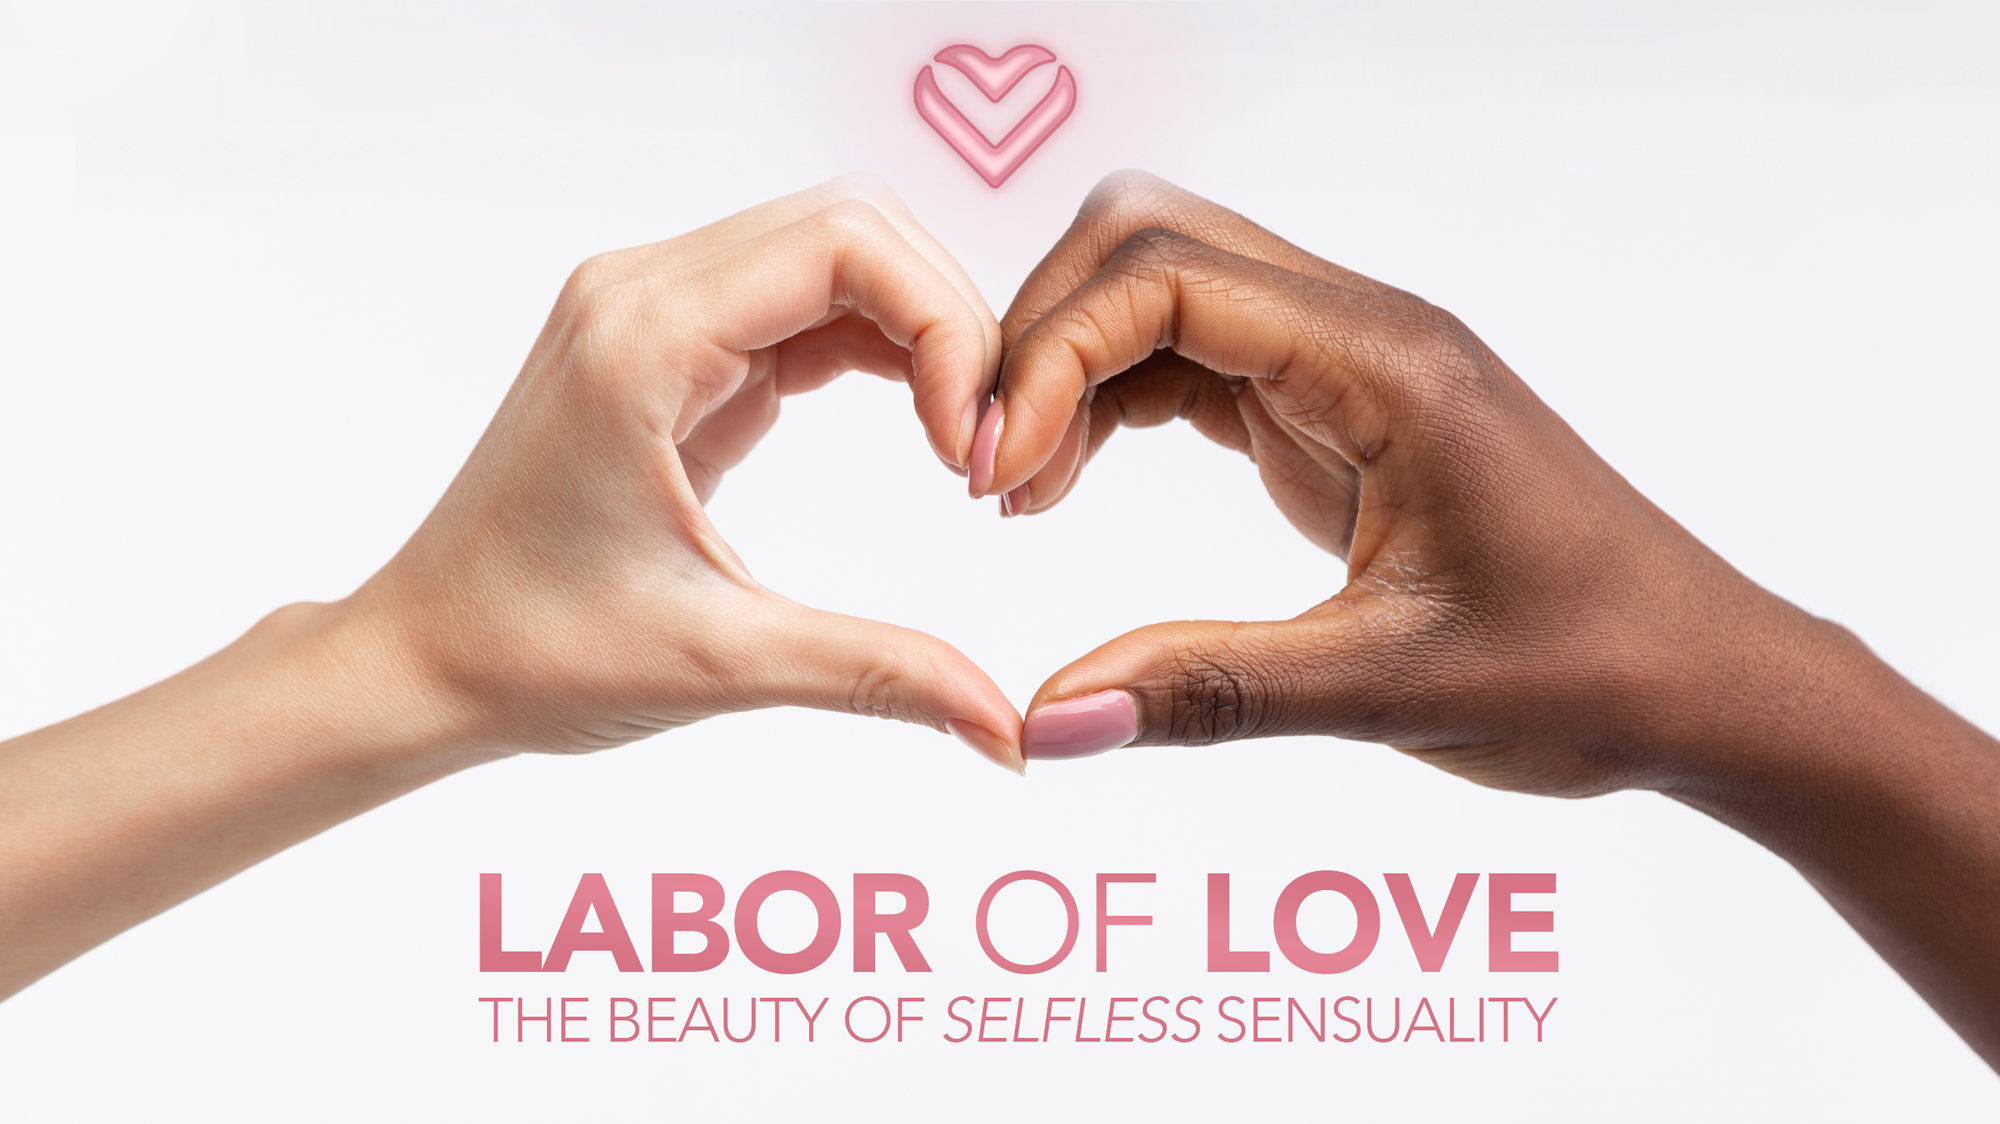 Take Part in the Labor of Love